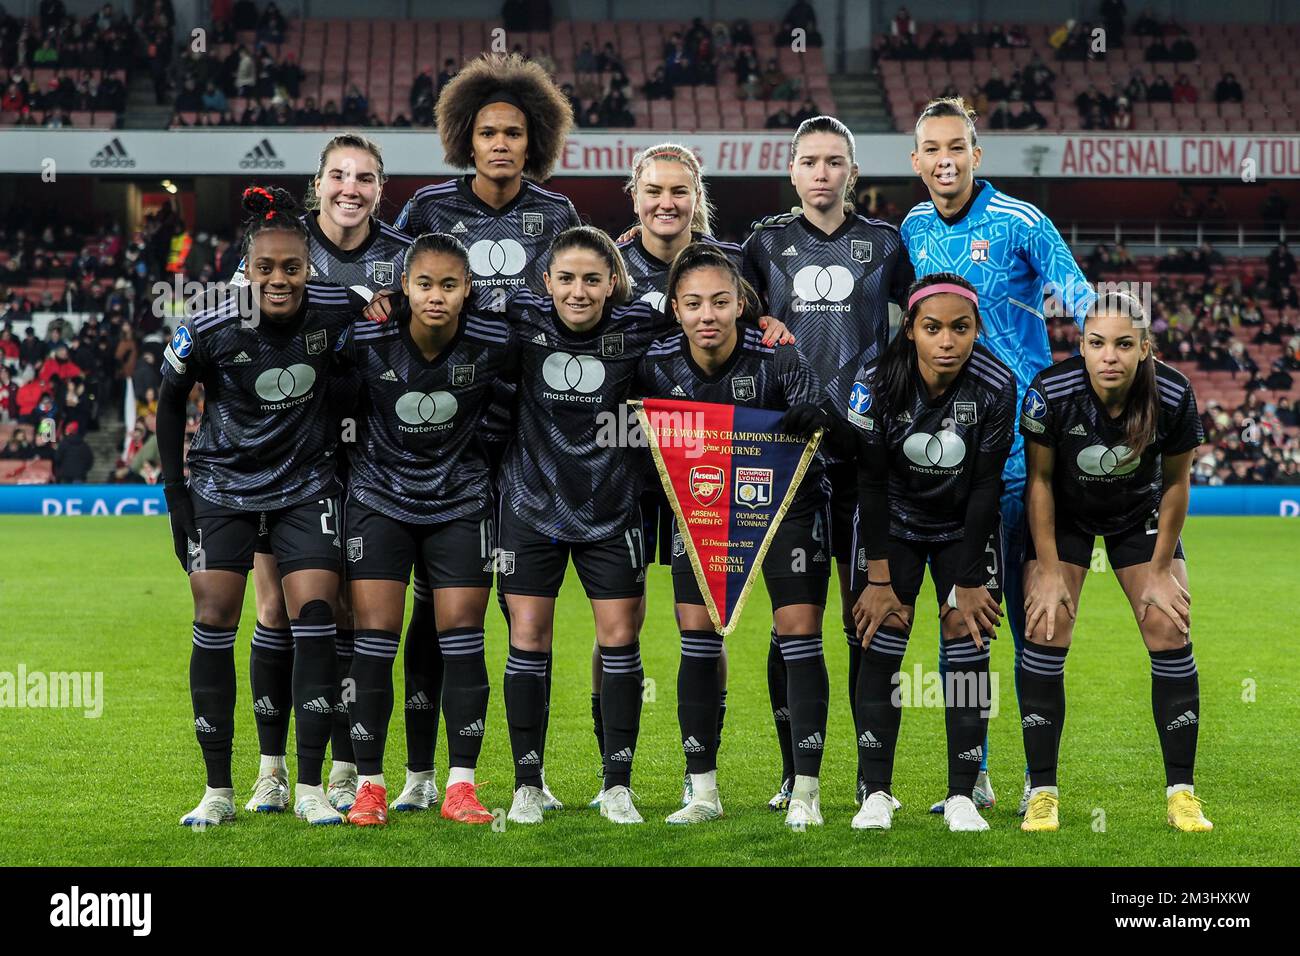 London, UK. 15th Dec, 2022. London, England, December 15th 2022: Olympique Lyon team photo during the UEFA Womens Champions League game between Arsenal and Olympique Lyonnais at Emirates Stadium in London, England (Natalie Mincher/SPP) Credit: SPP Sport Press Photo. /Alamy Live News Stock Photo